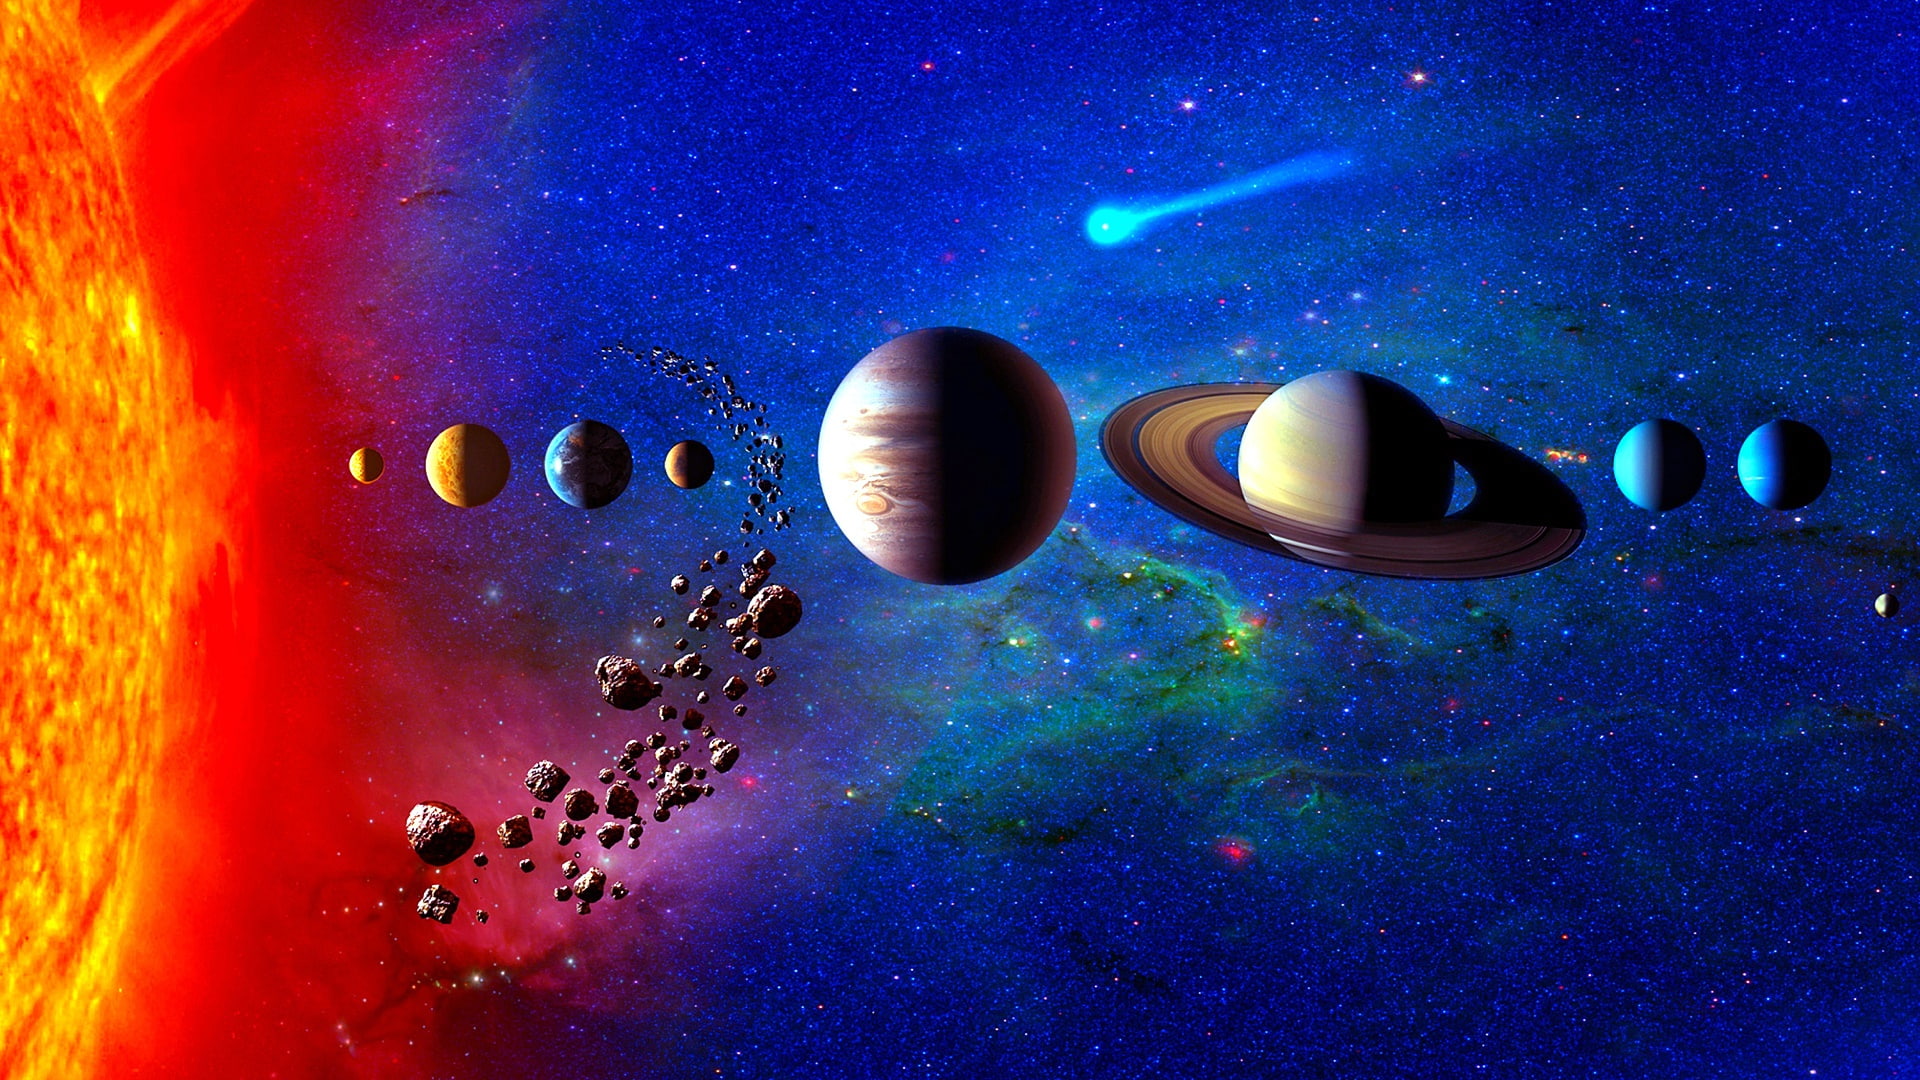 solar system, planetary system, space art, planets, universe